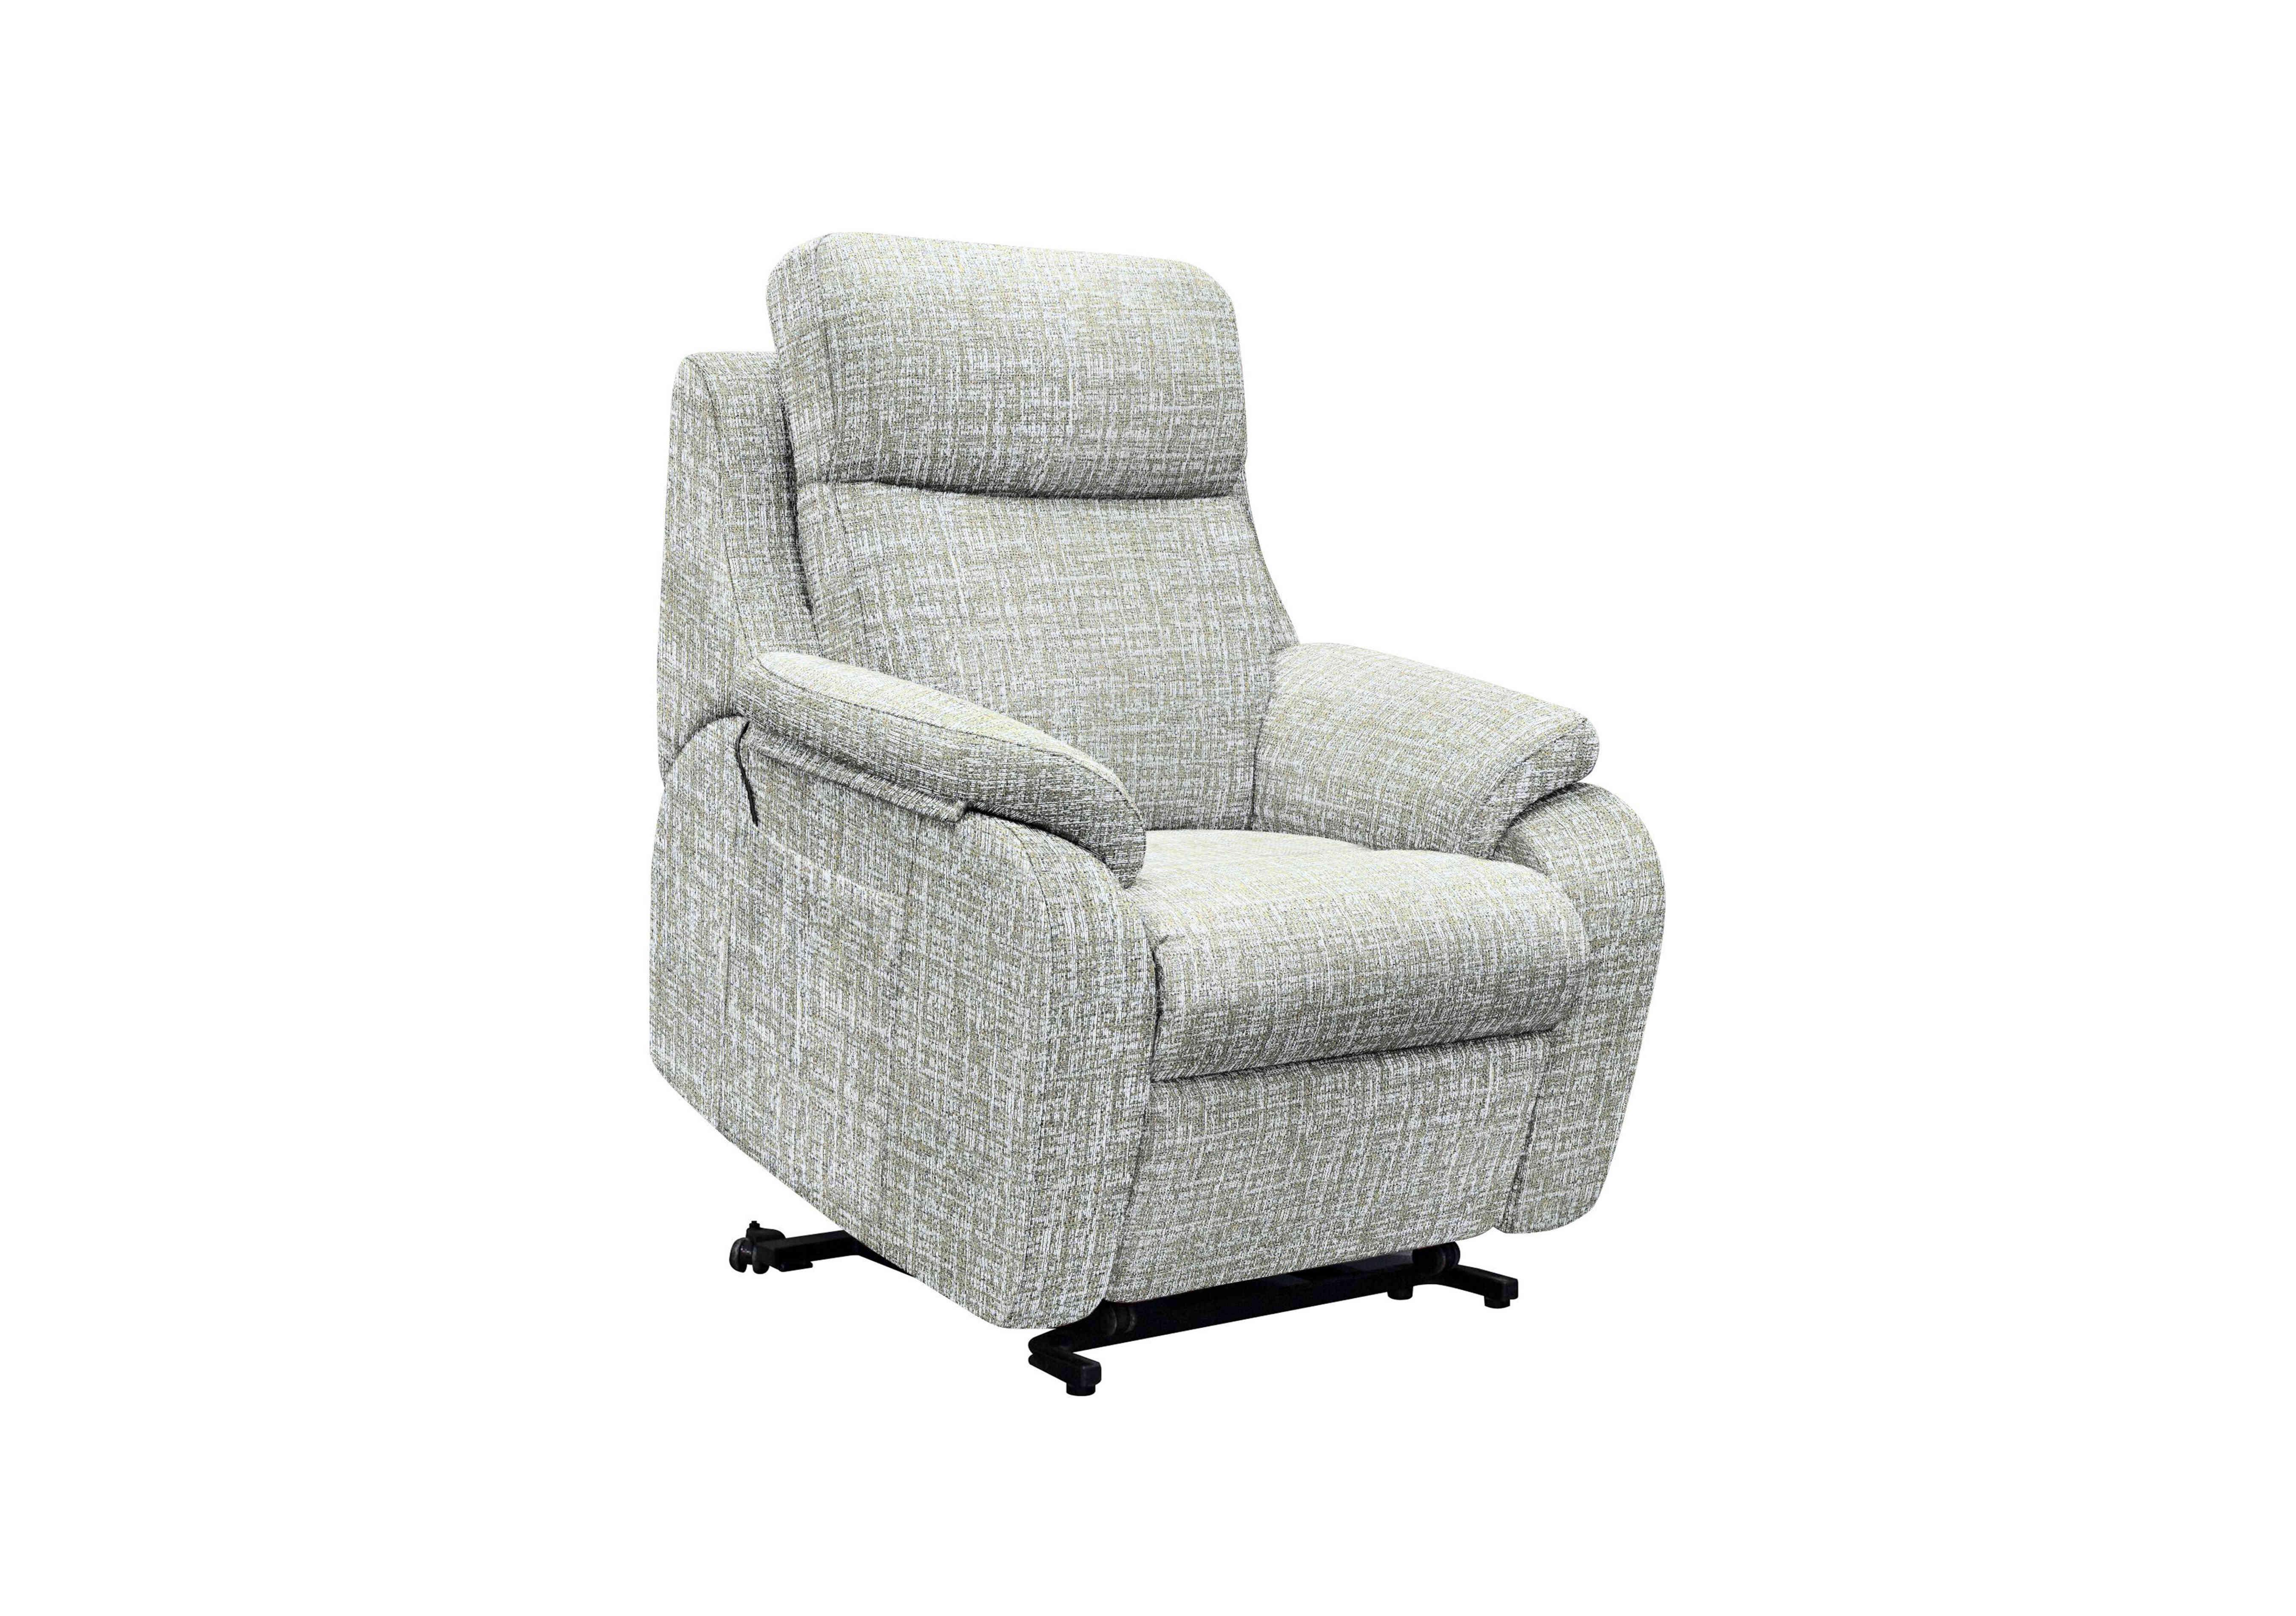 Kingsbury Large Fabric Lift and Rise Chair in B102 Shore Oatmeal on Furniture Village